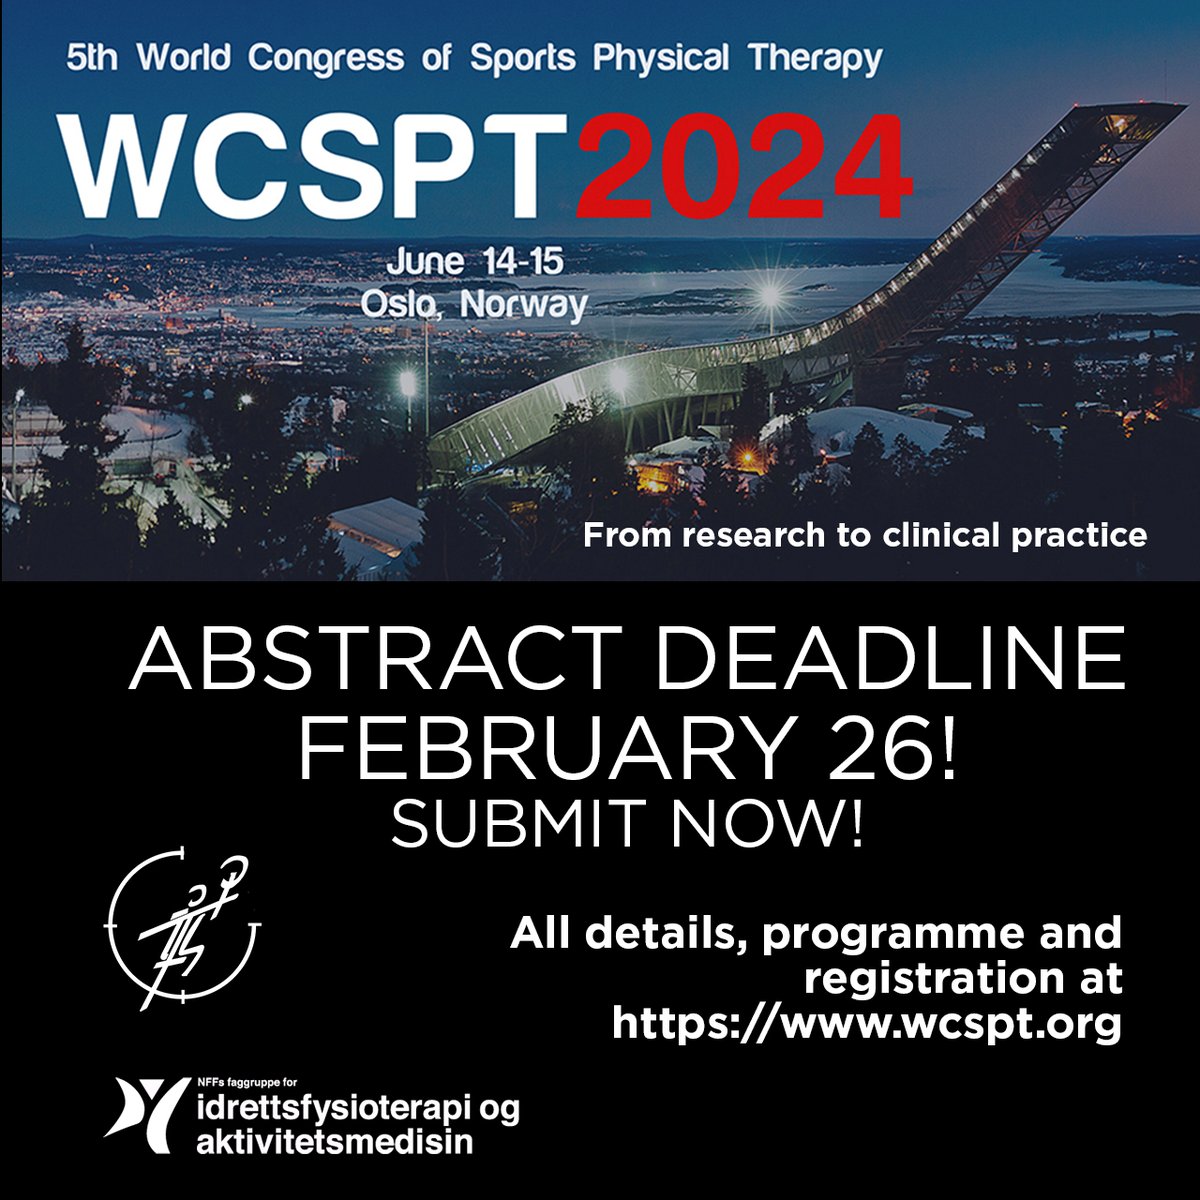 FIFTH WORLD CONGRESS OF SPORTS PHYSICAL THERAPY ABSTRACTS NOW BEING ACCEPTED Deadline February 26 Information and registration at wcspt.org